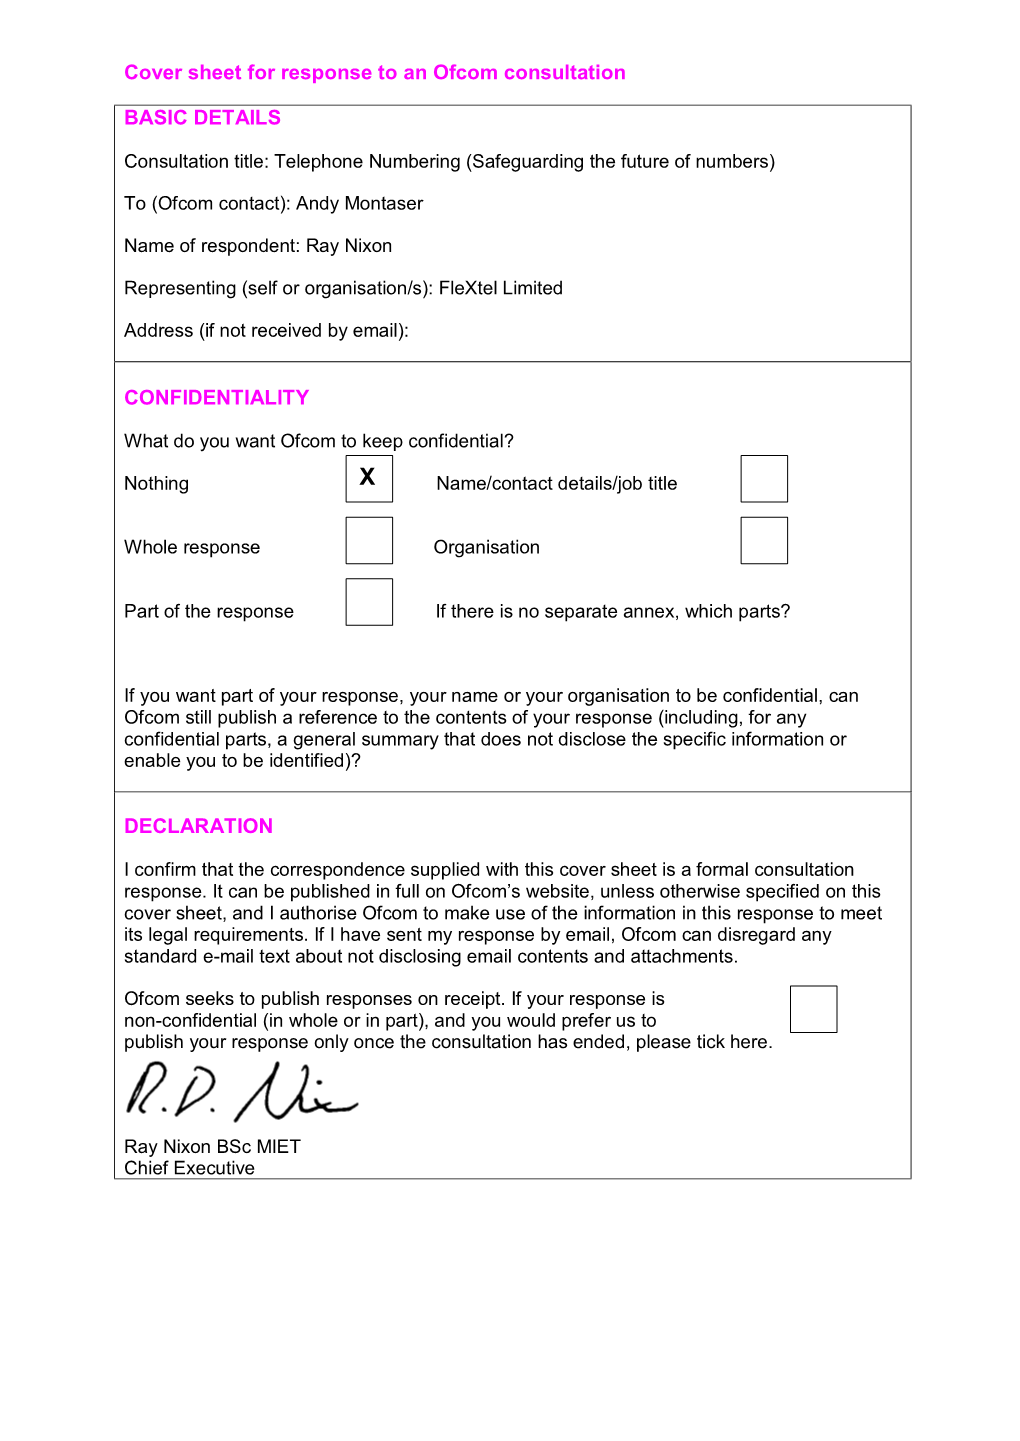 Cover Sheet for Response to an Ofcom Consultation BASIC DETAILS CONFIDENTIALITY DECLARATION